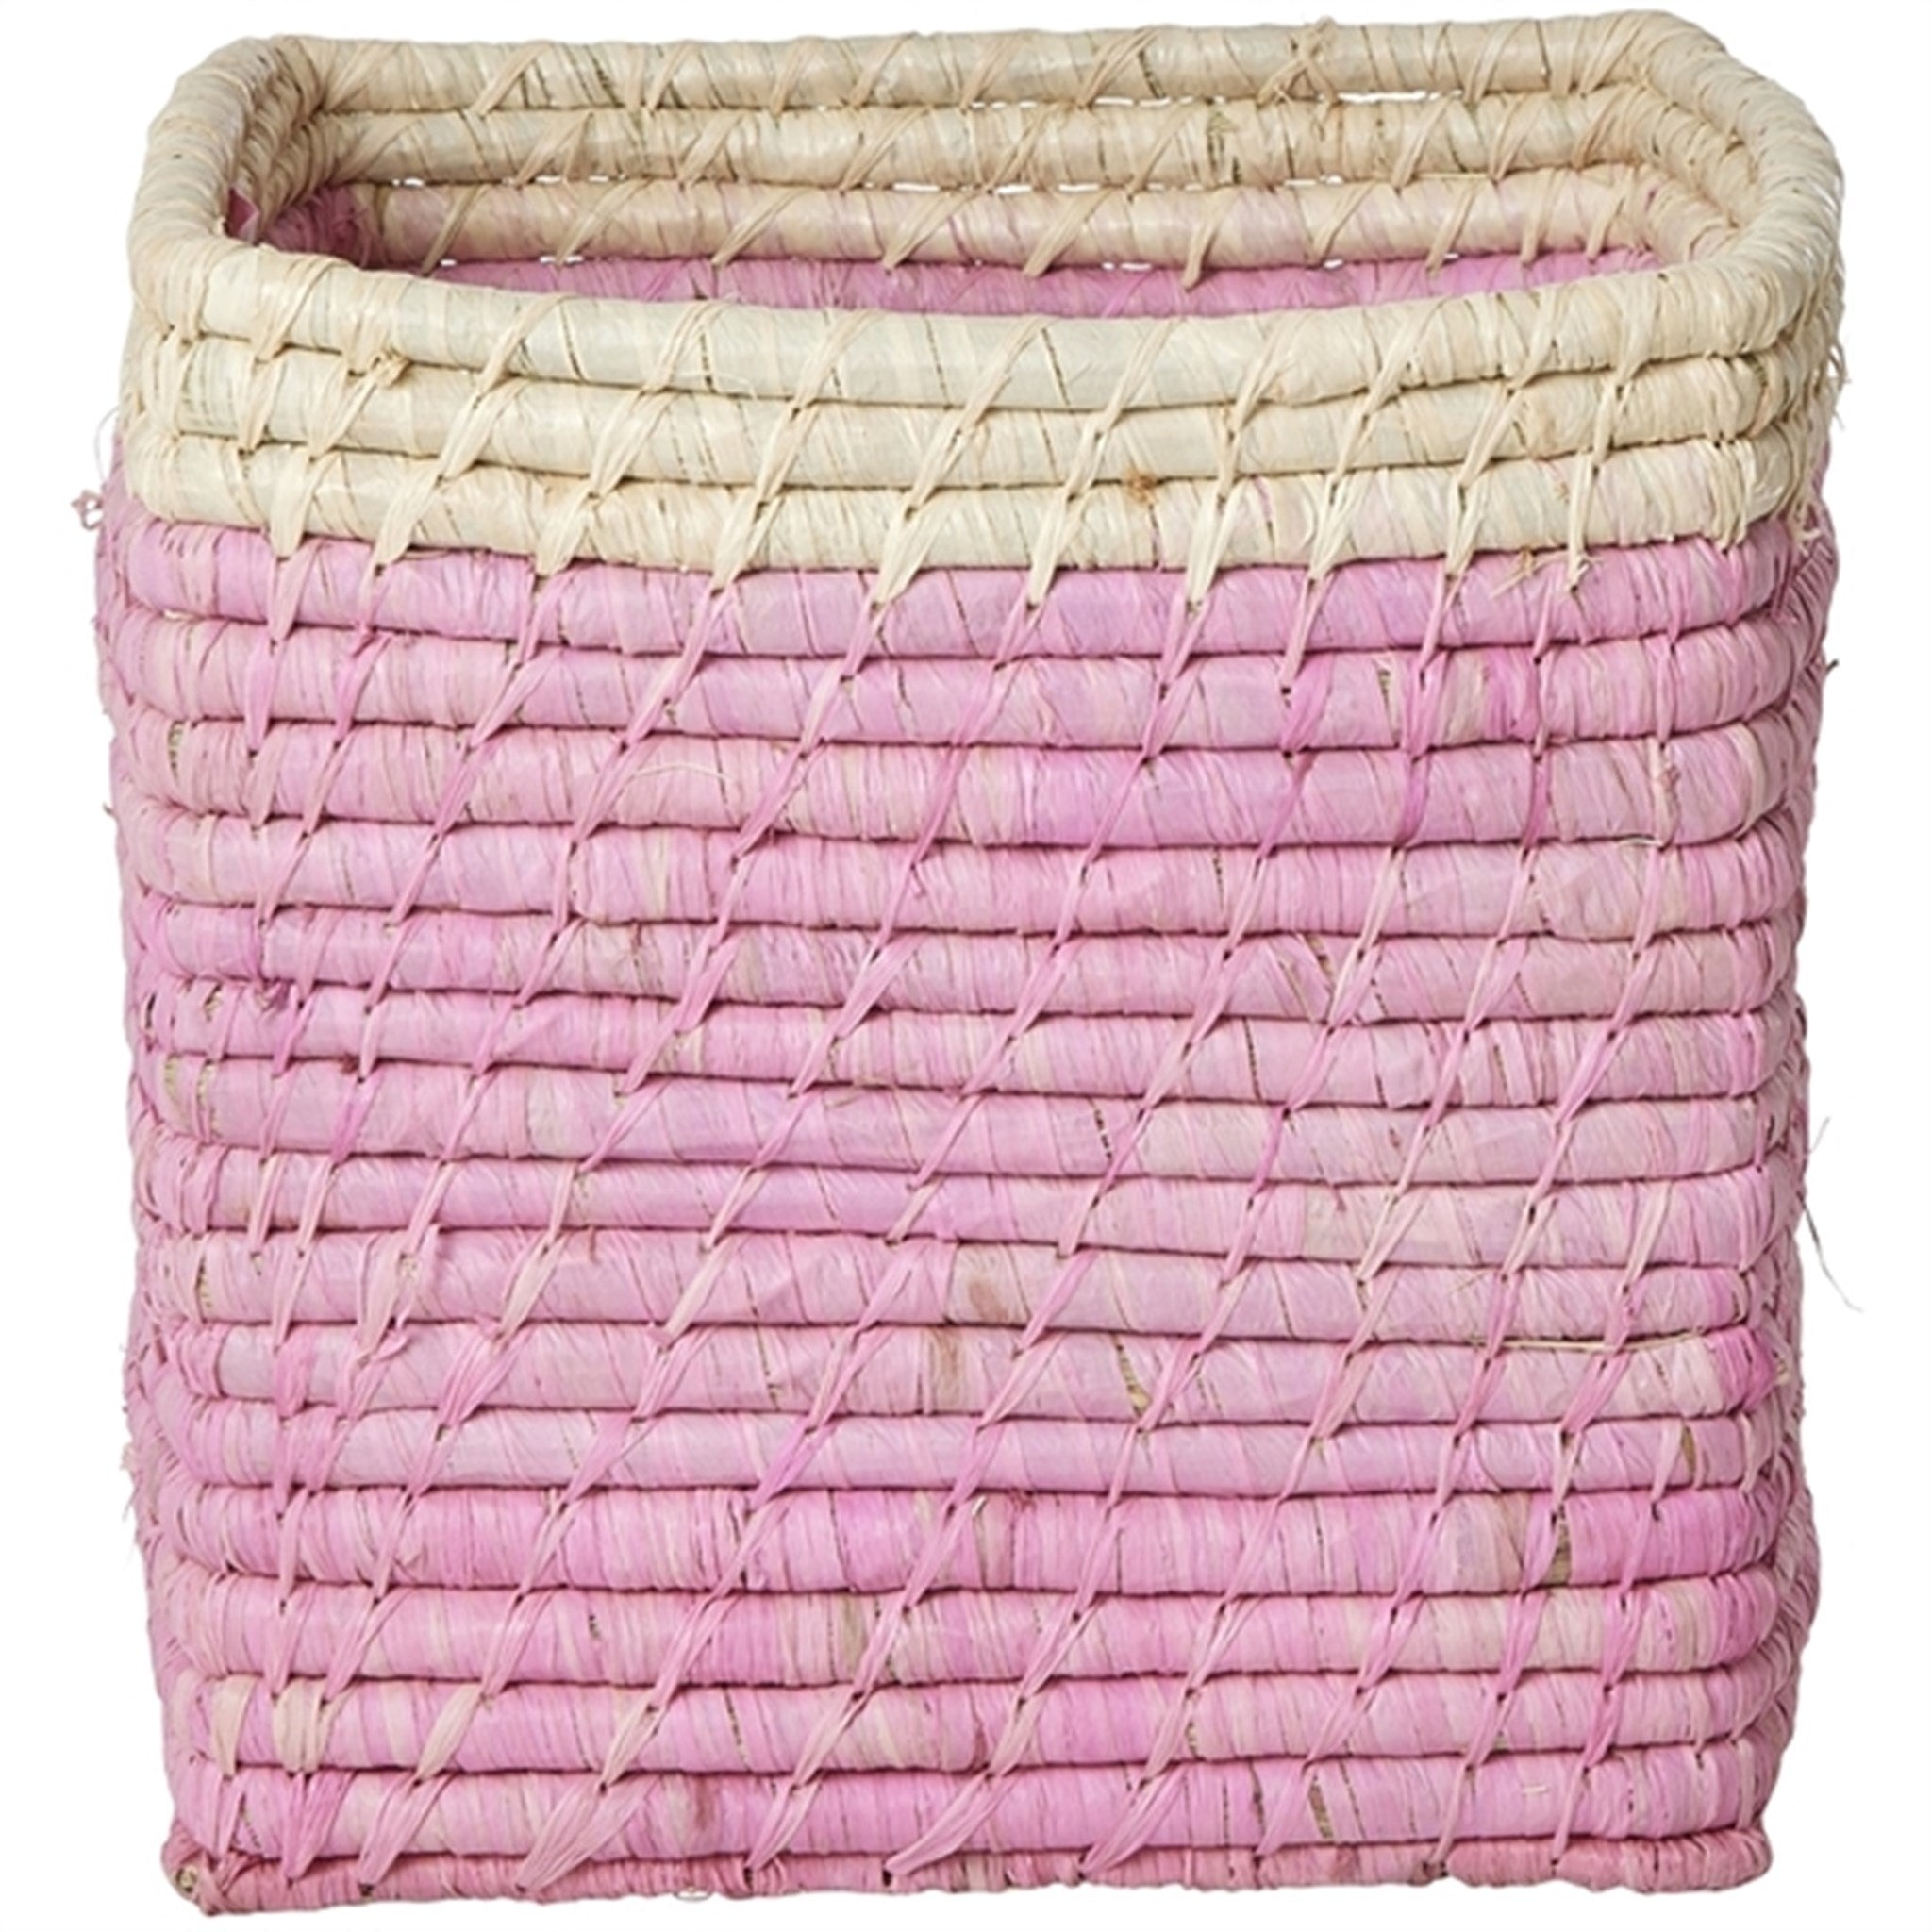 RICE Soft Pink/Nature Basket for Storage Small